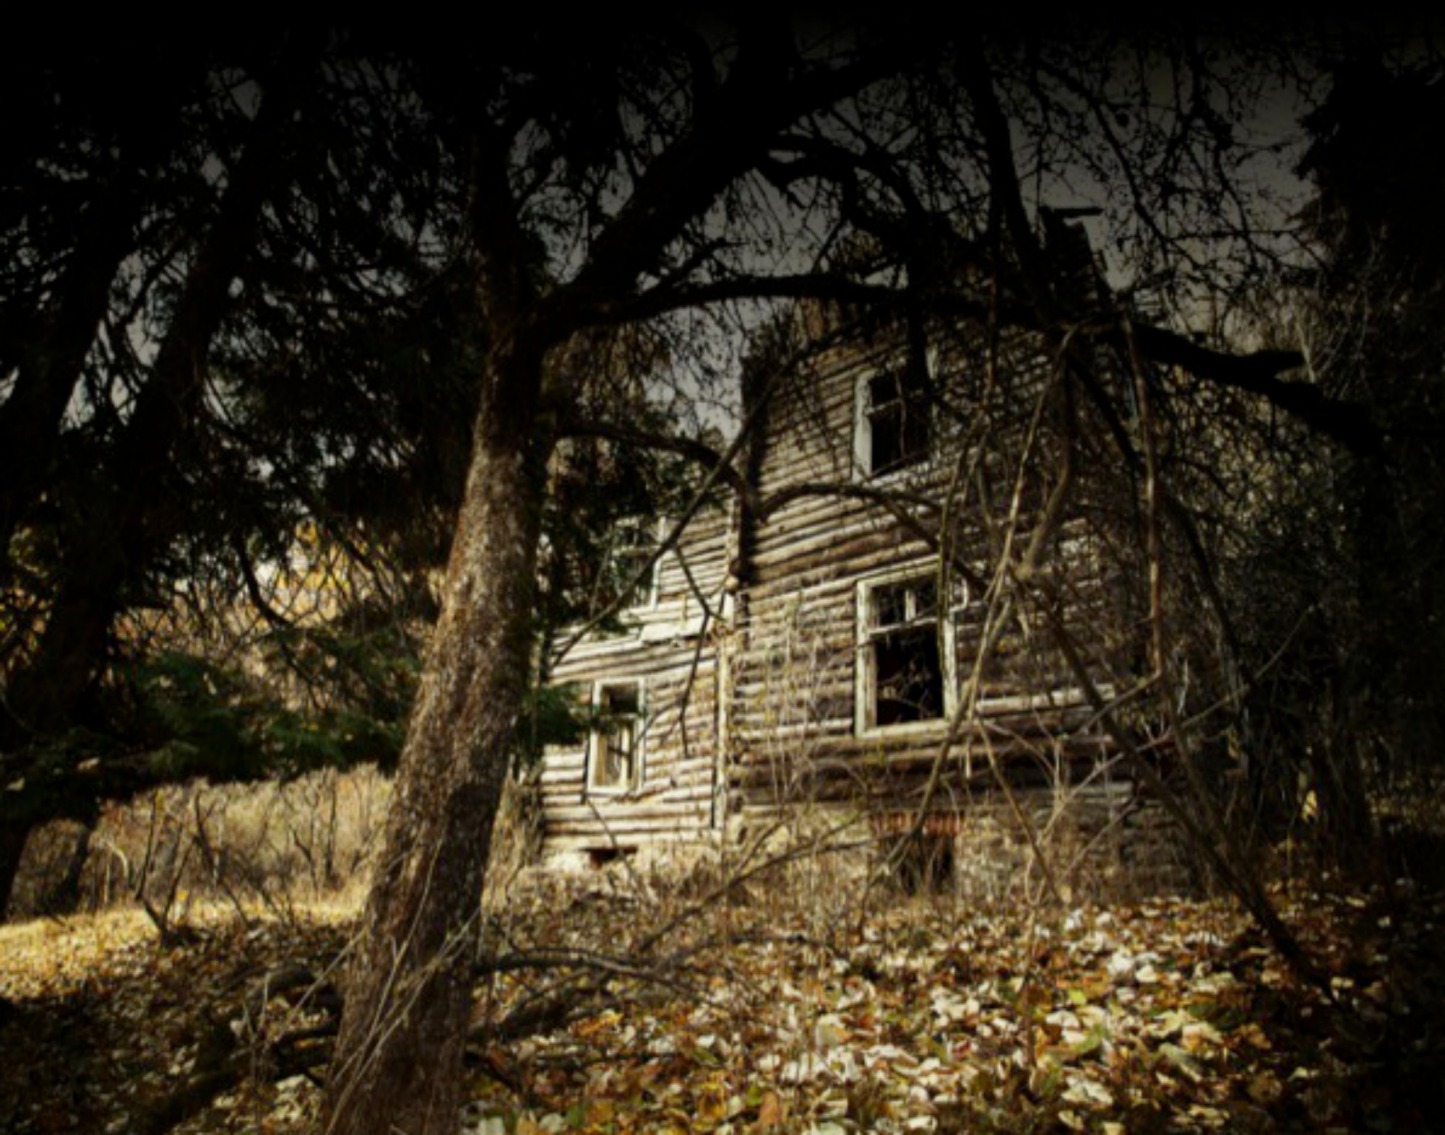 The Definitive Guide To Utah’s Haunted Houses 101.5 The Eagle